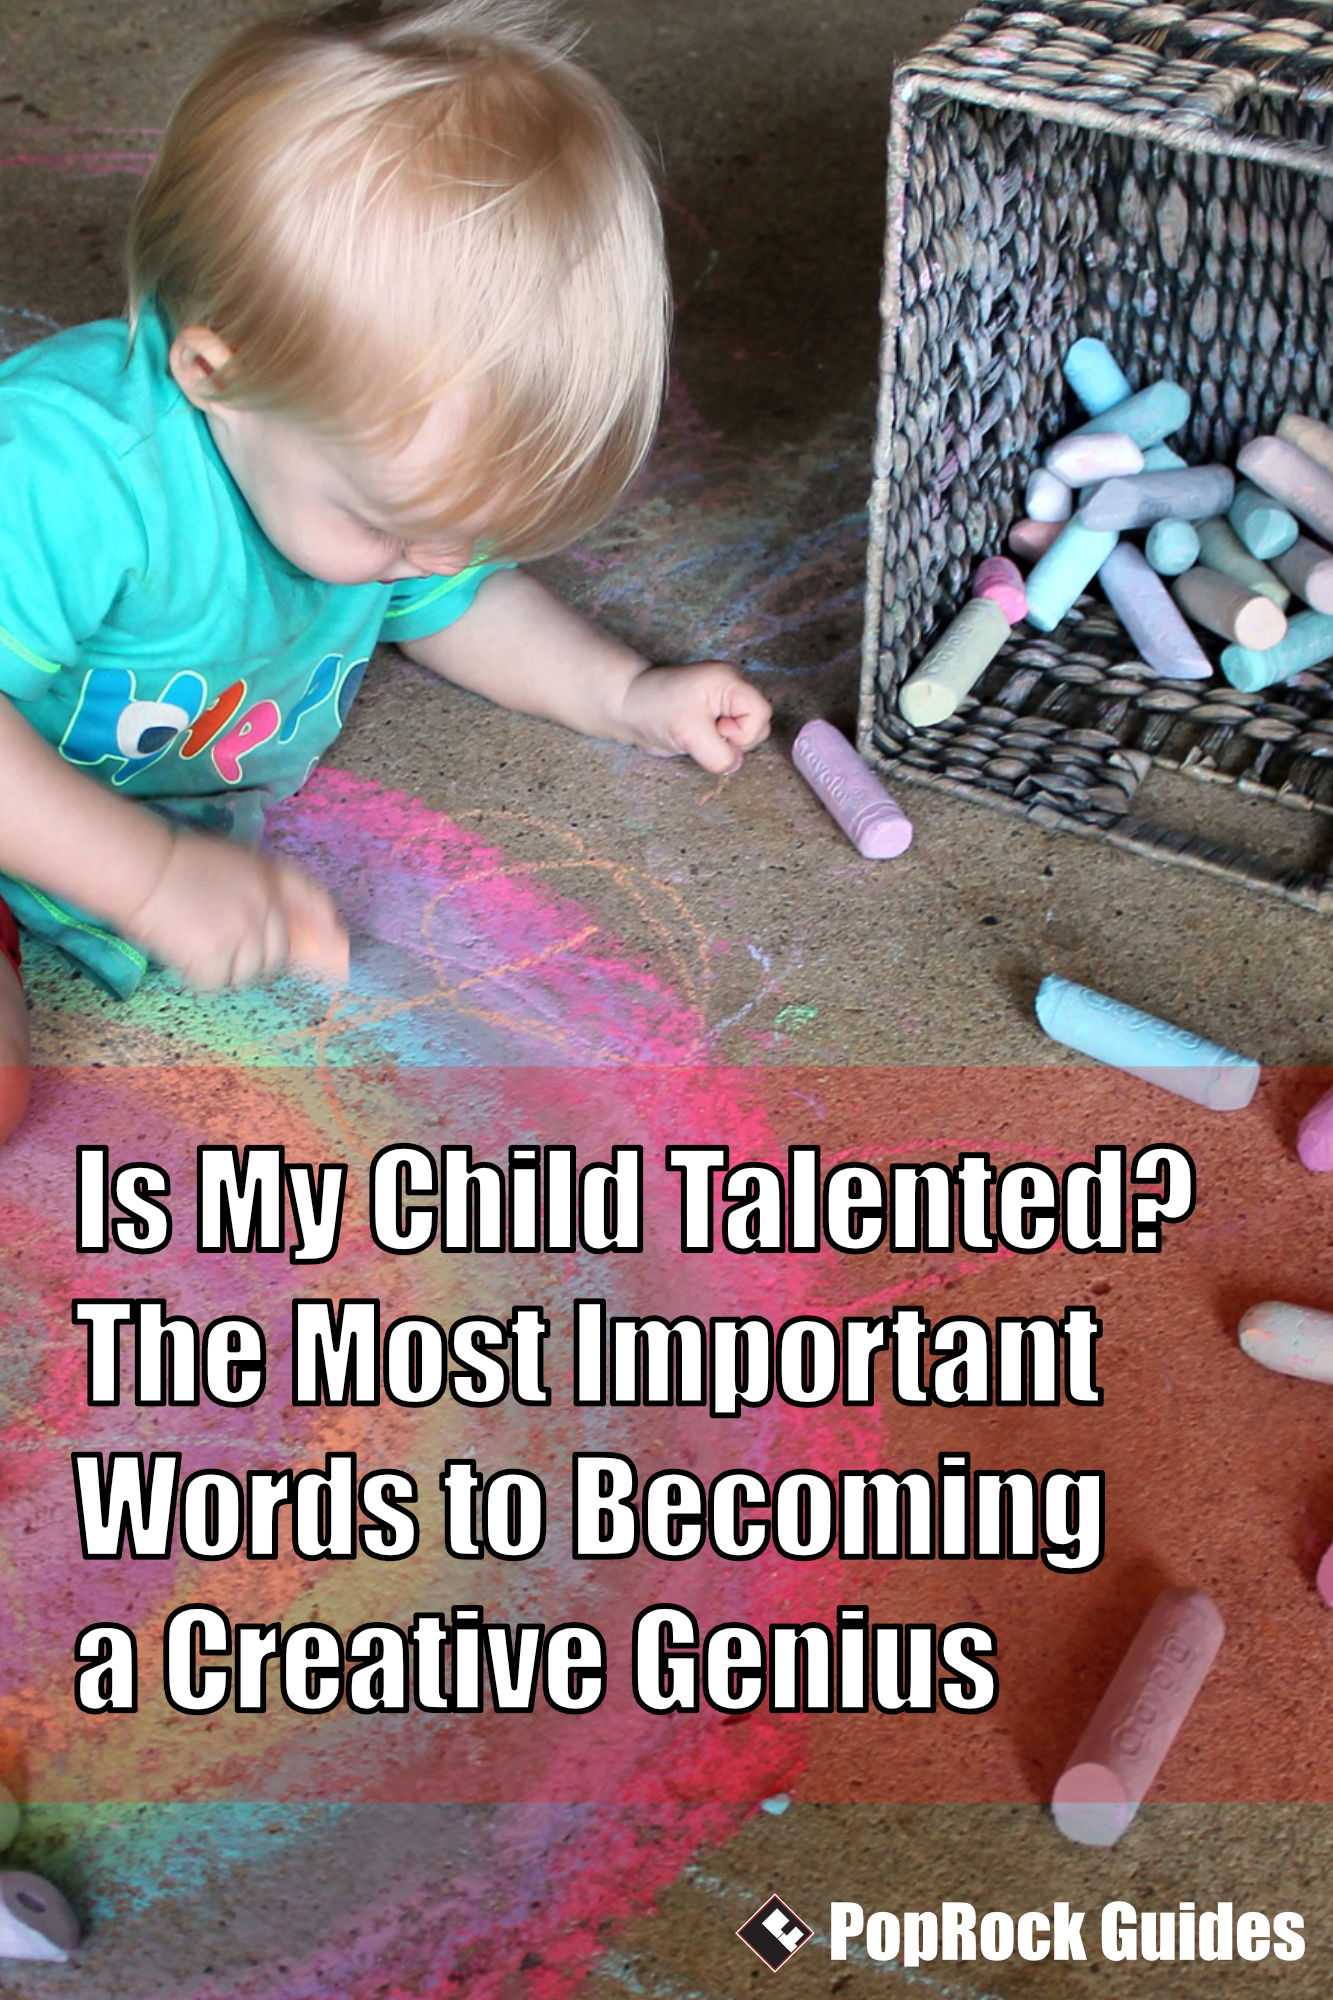 Is My Child Talented? The Most Important Words To Becoming a Creative Genius